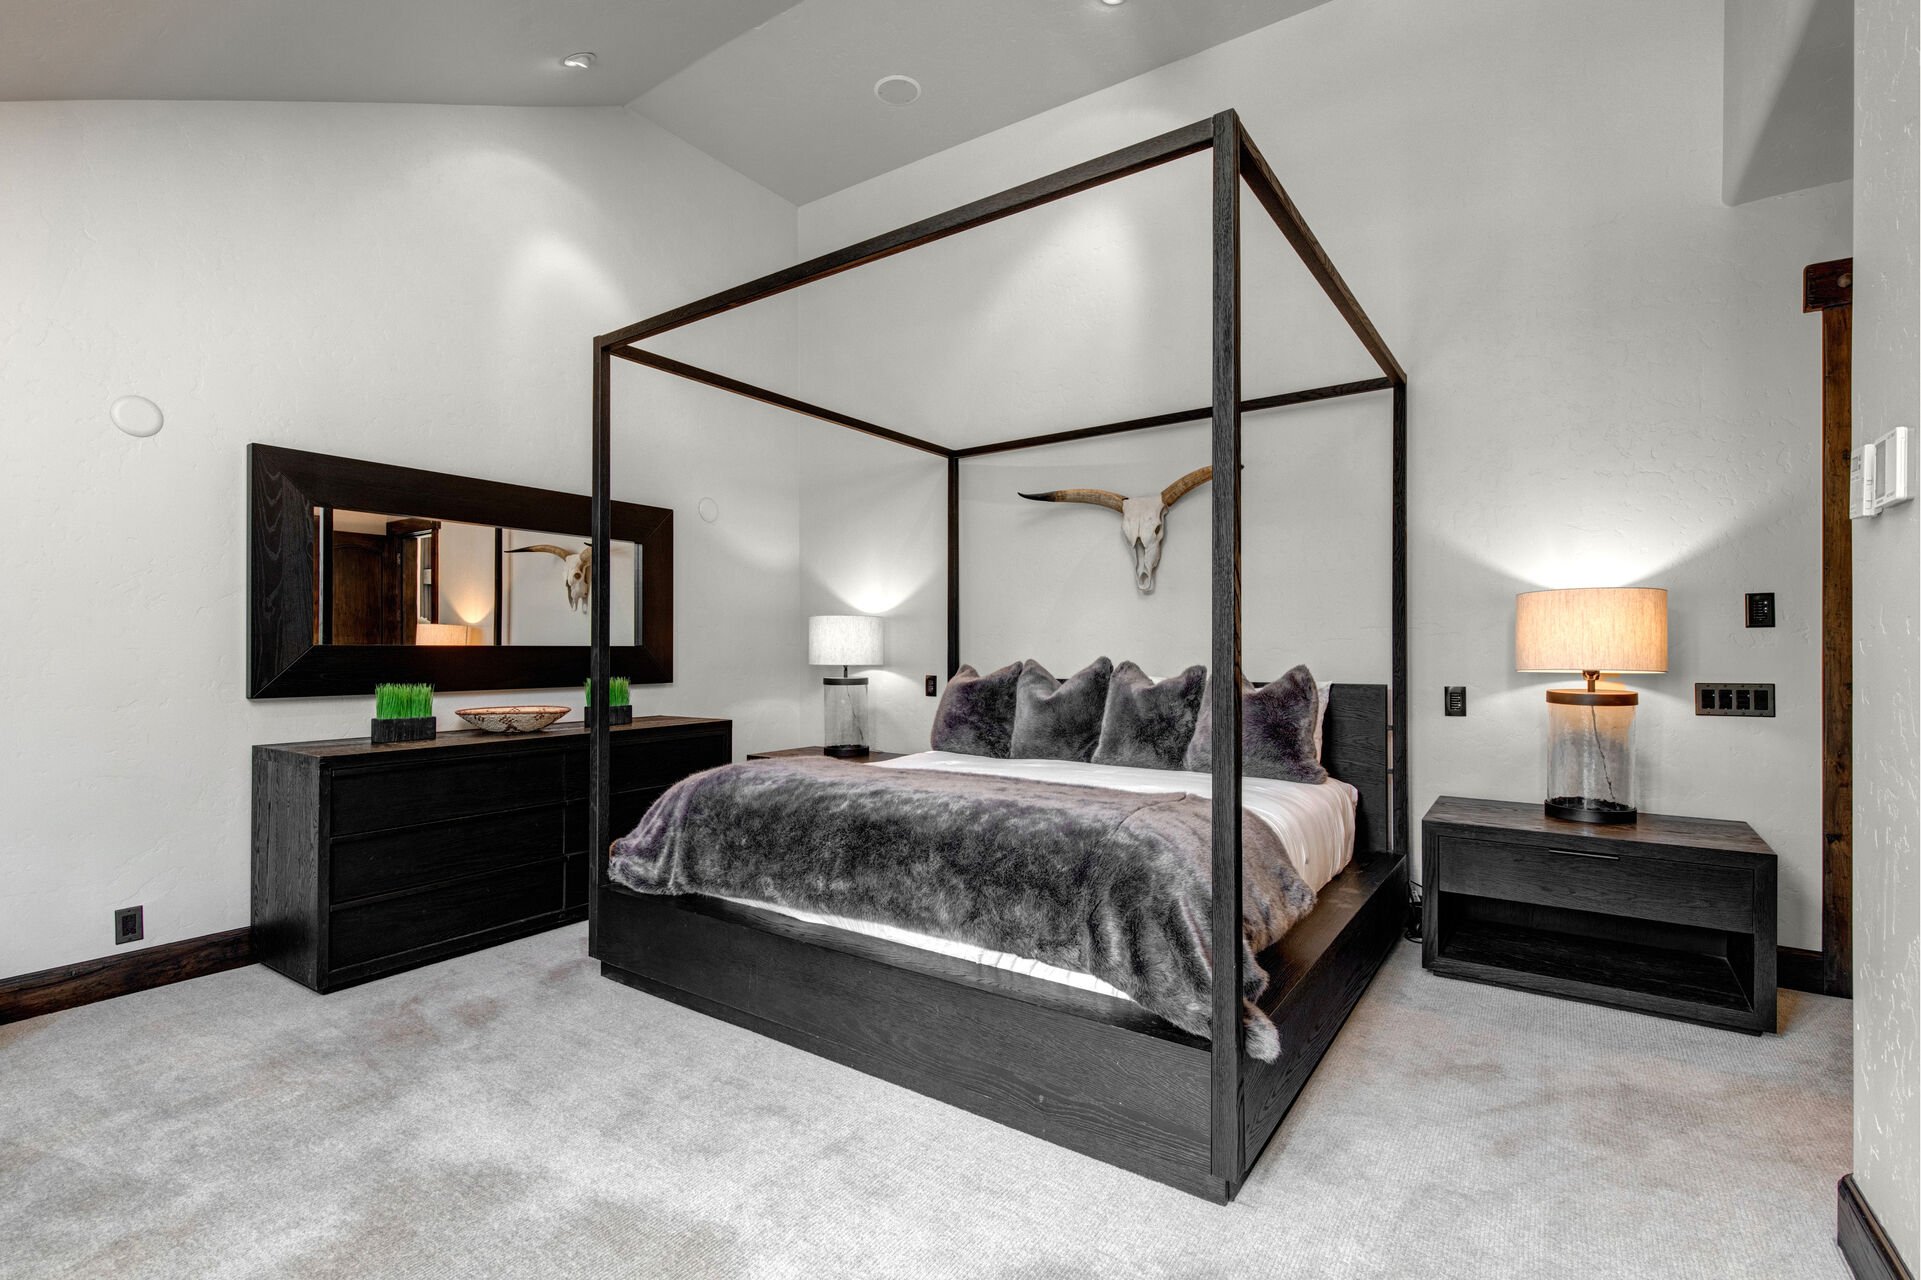 Grand Master Bedroom with King Bed, HD Smart TV, Sonos Sound, Gas Fireplace, Private Bath and Private Balcony